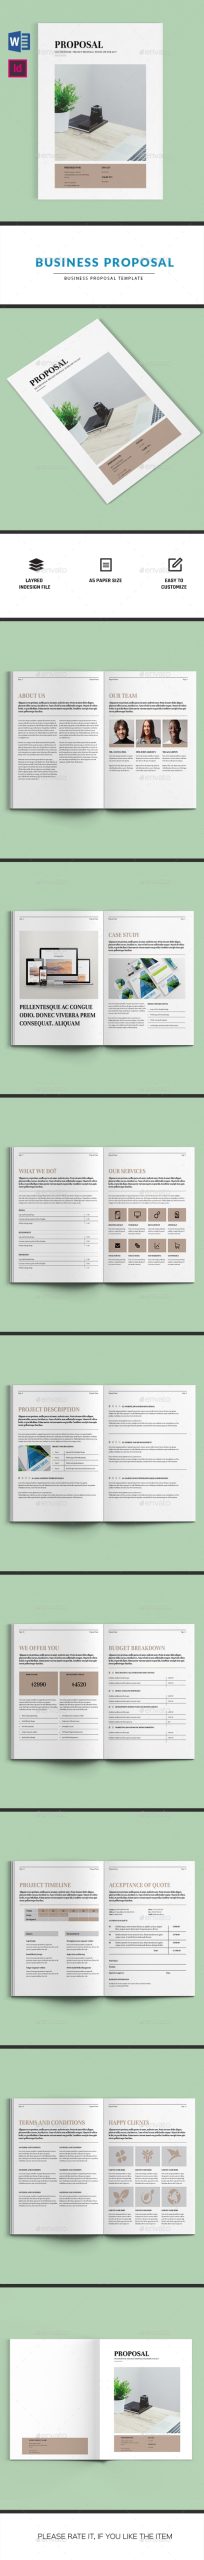 Business Proposal | Indesign & Ms Word Template By Smmrdesign For Business Proposal Indesign Template